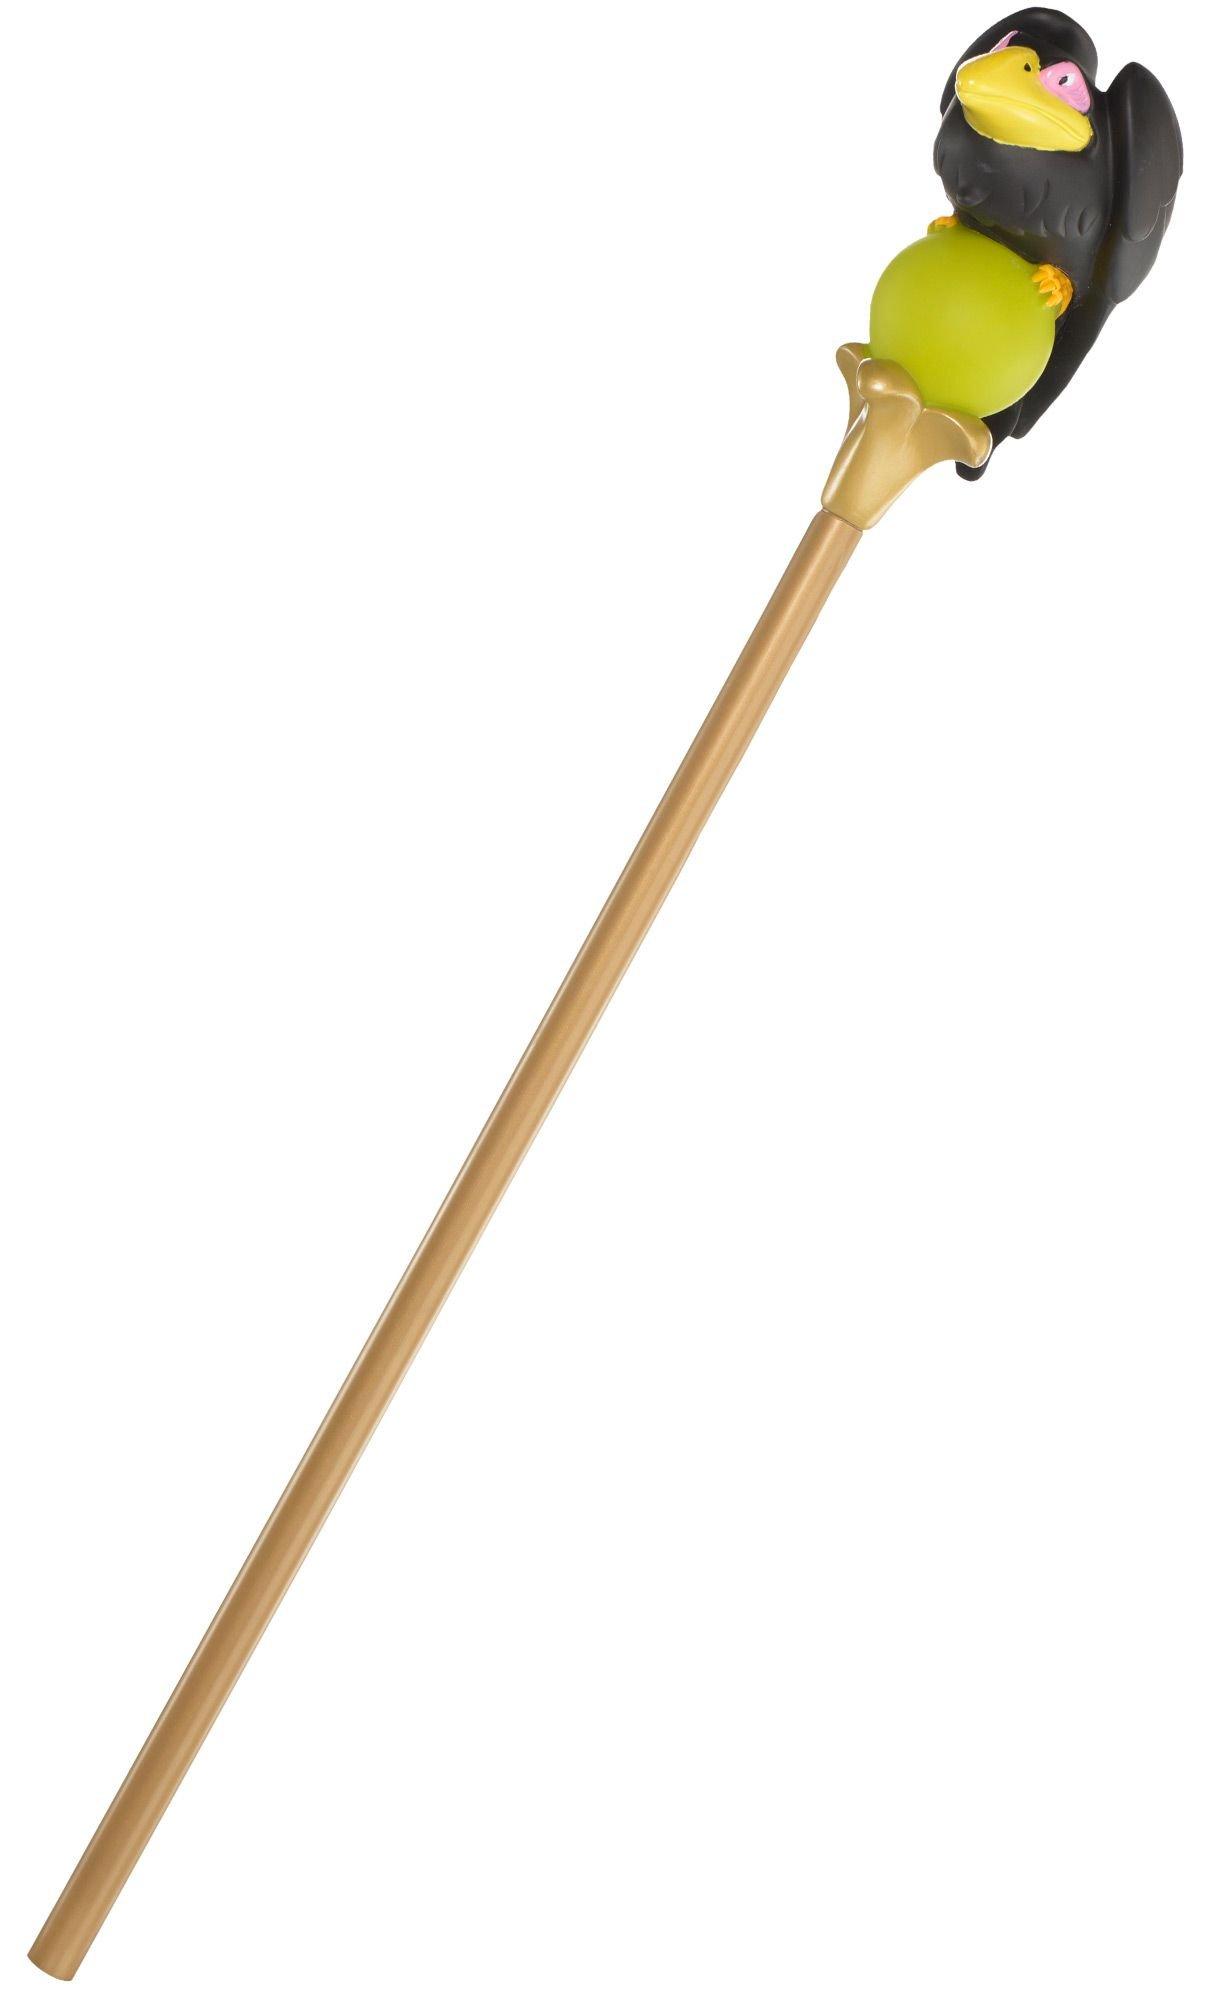 Adult Maleficent Scepter